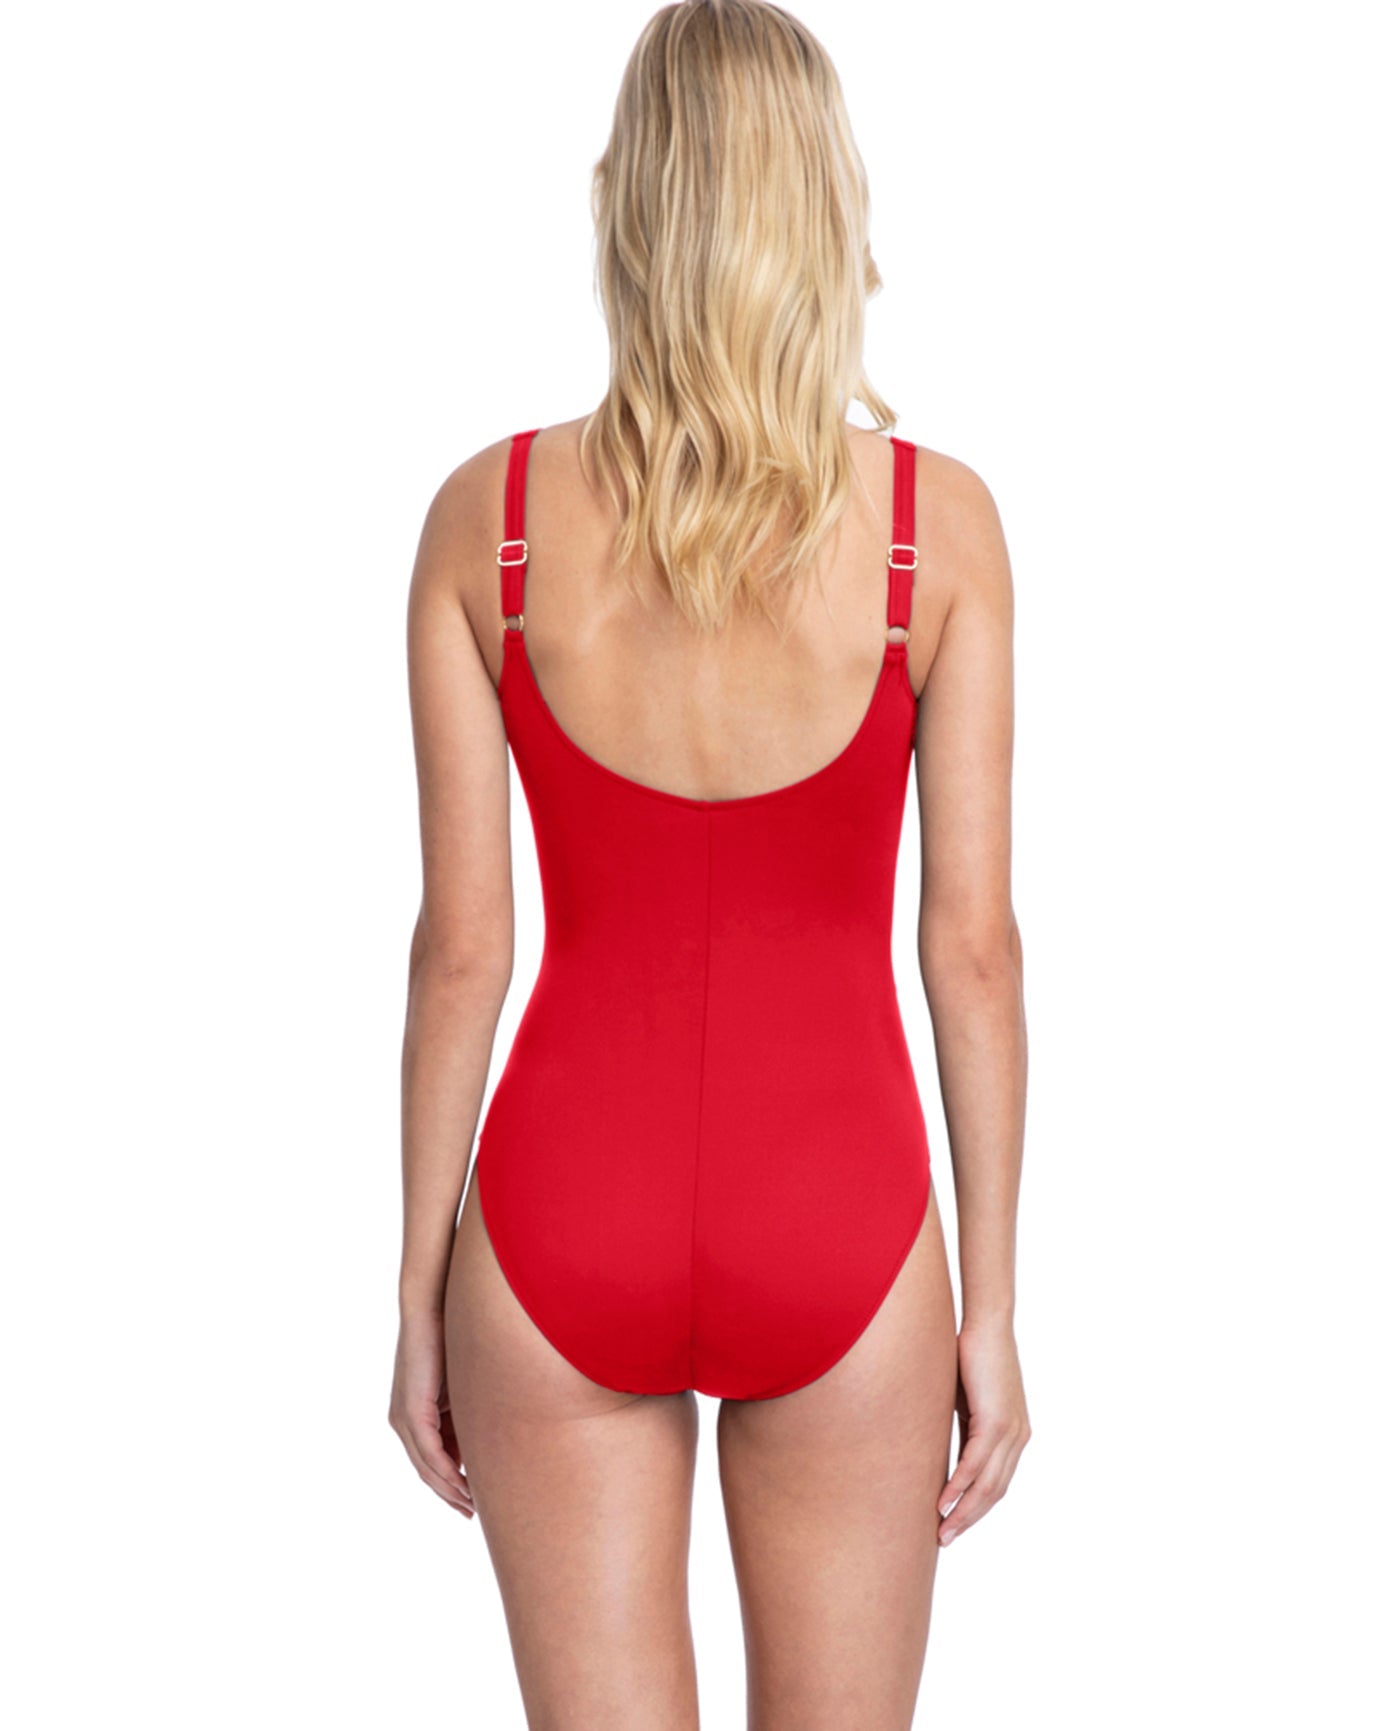 Back View Of Full Coverage Gottex Collection Bardot  Square Neck High Back One Piece Swimsuit | GOT Bardot Red